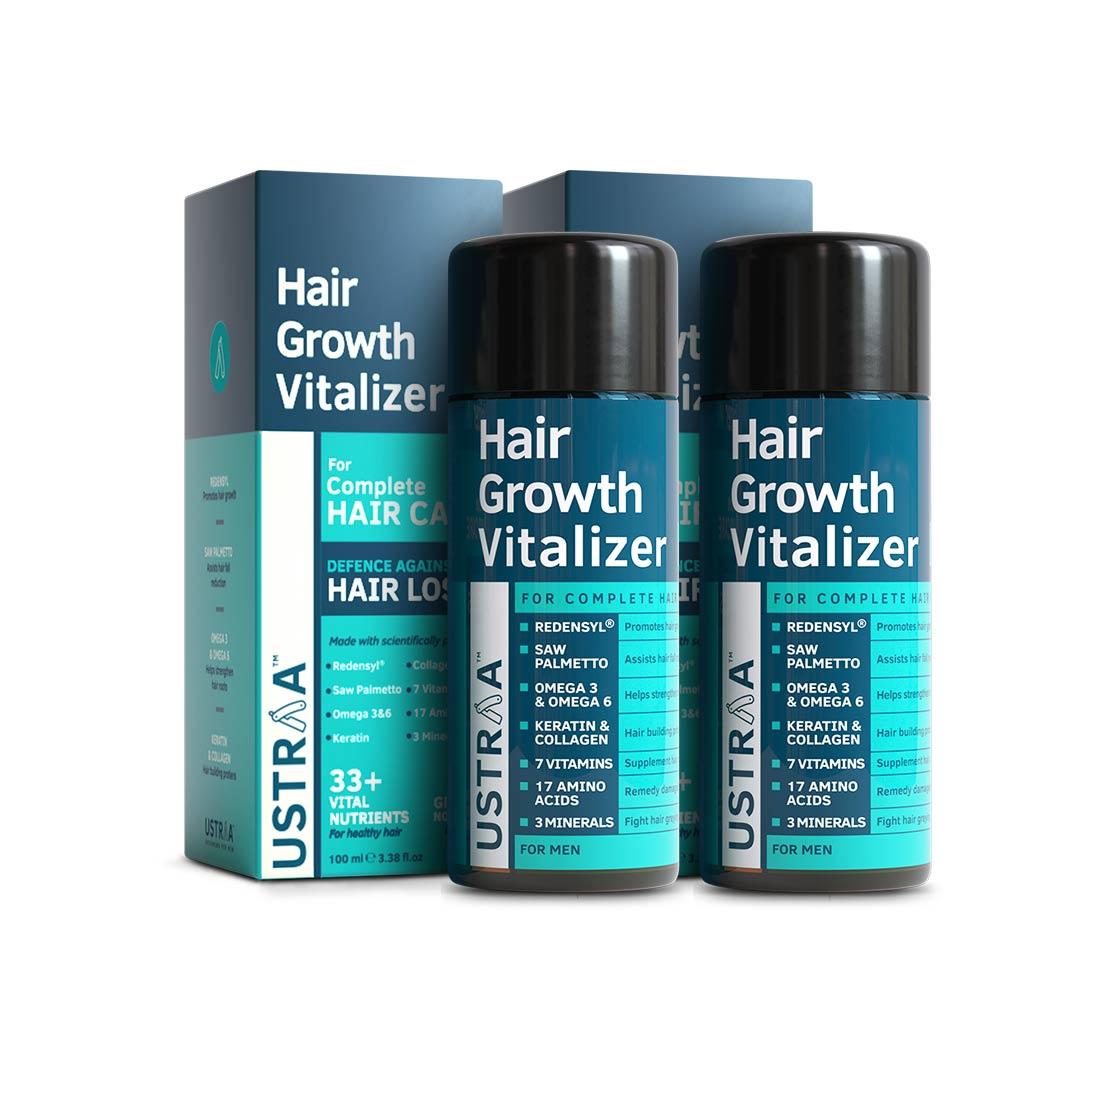 Ustraa Hair Growth Vitalizer for Men, Set of 2: With Redensyl, Saw Palmetto, Keratin & more